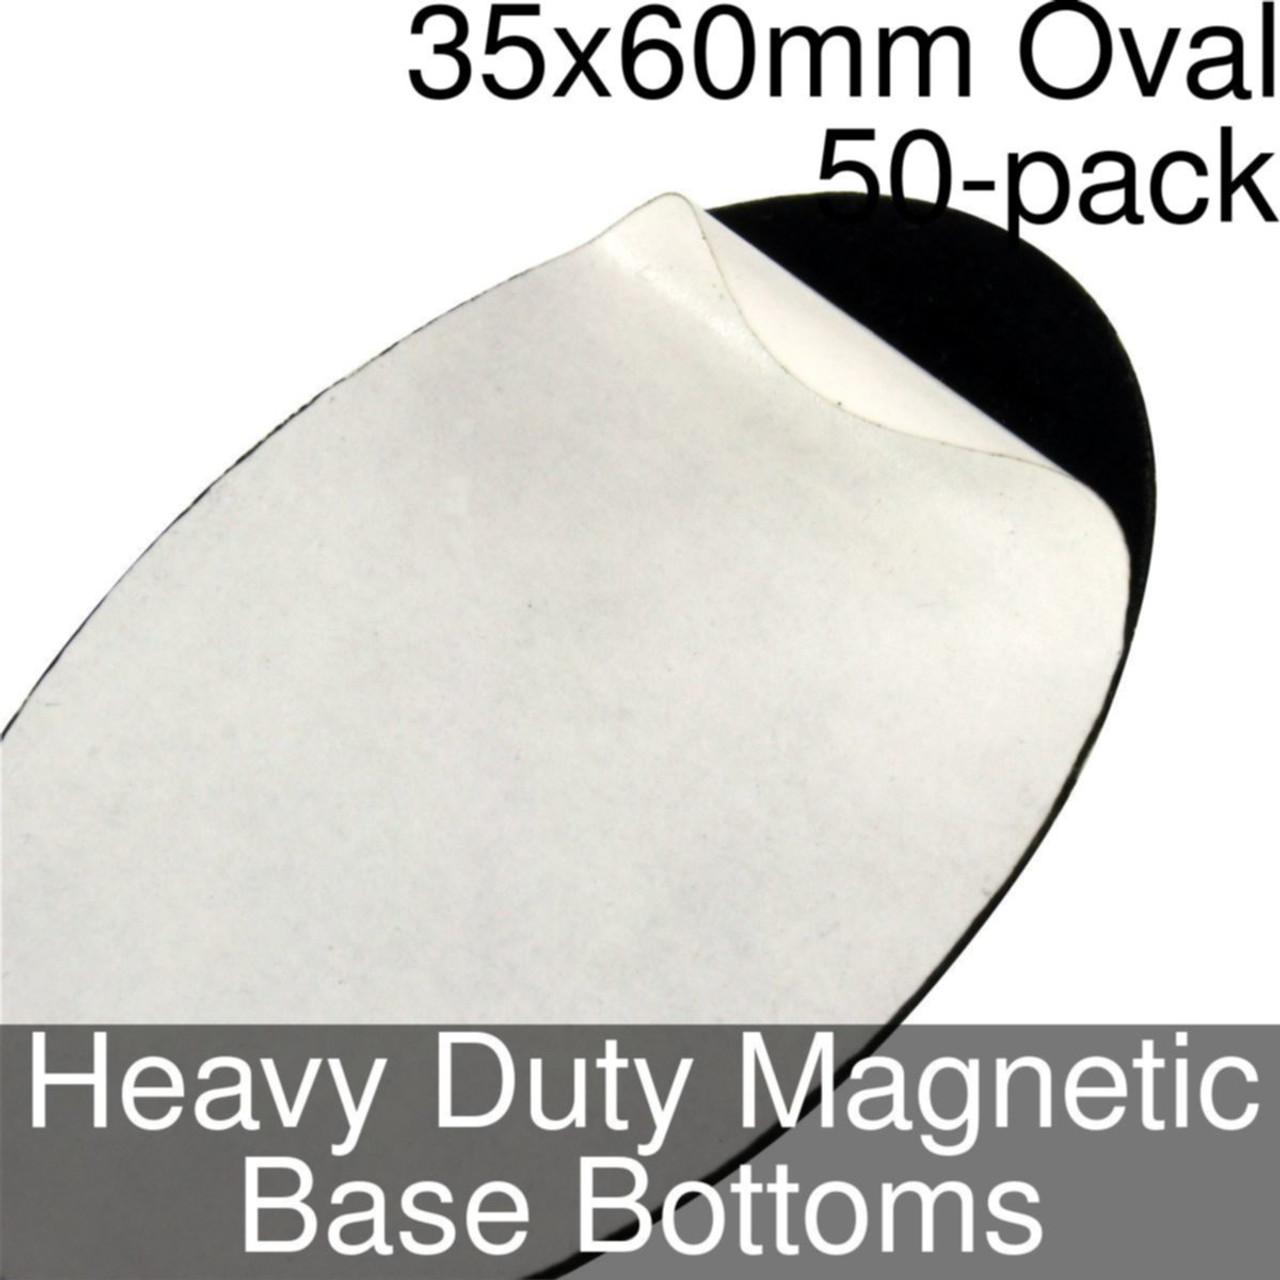 35x60mm Oval Self Adhesive Heavy Duty Magnetic Base Bottom 50 Count